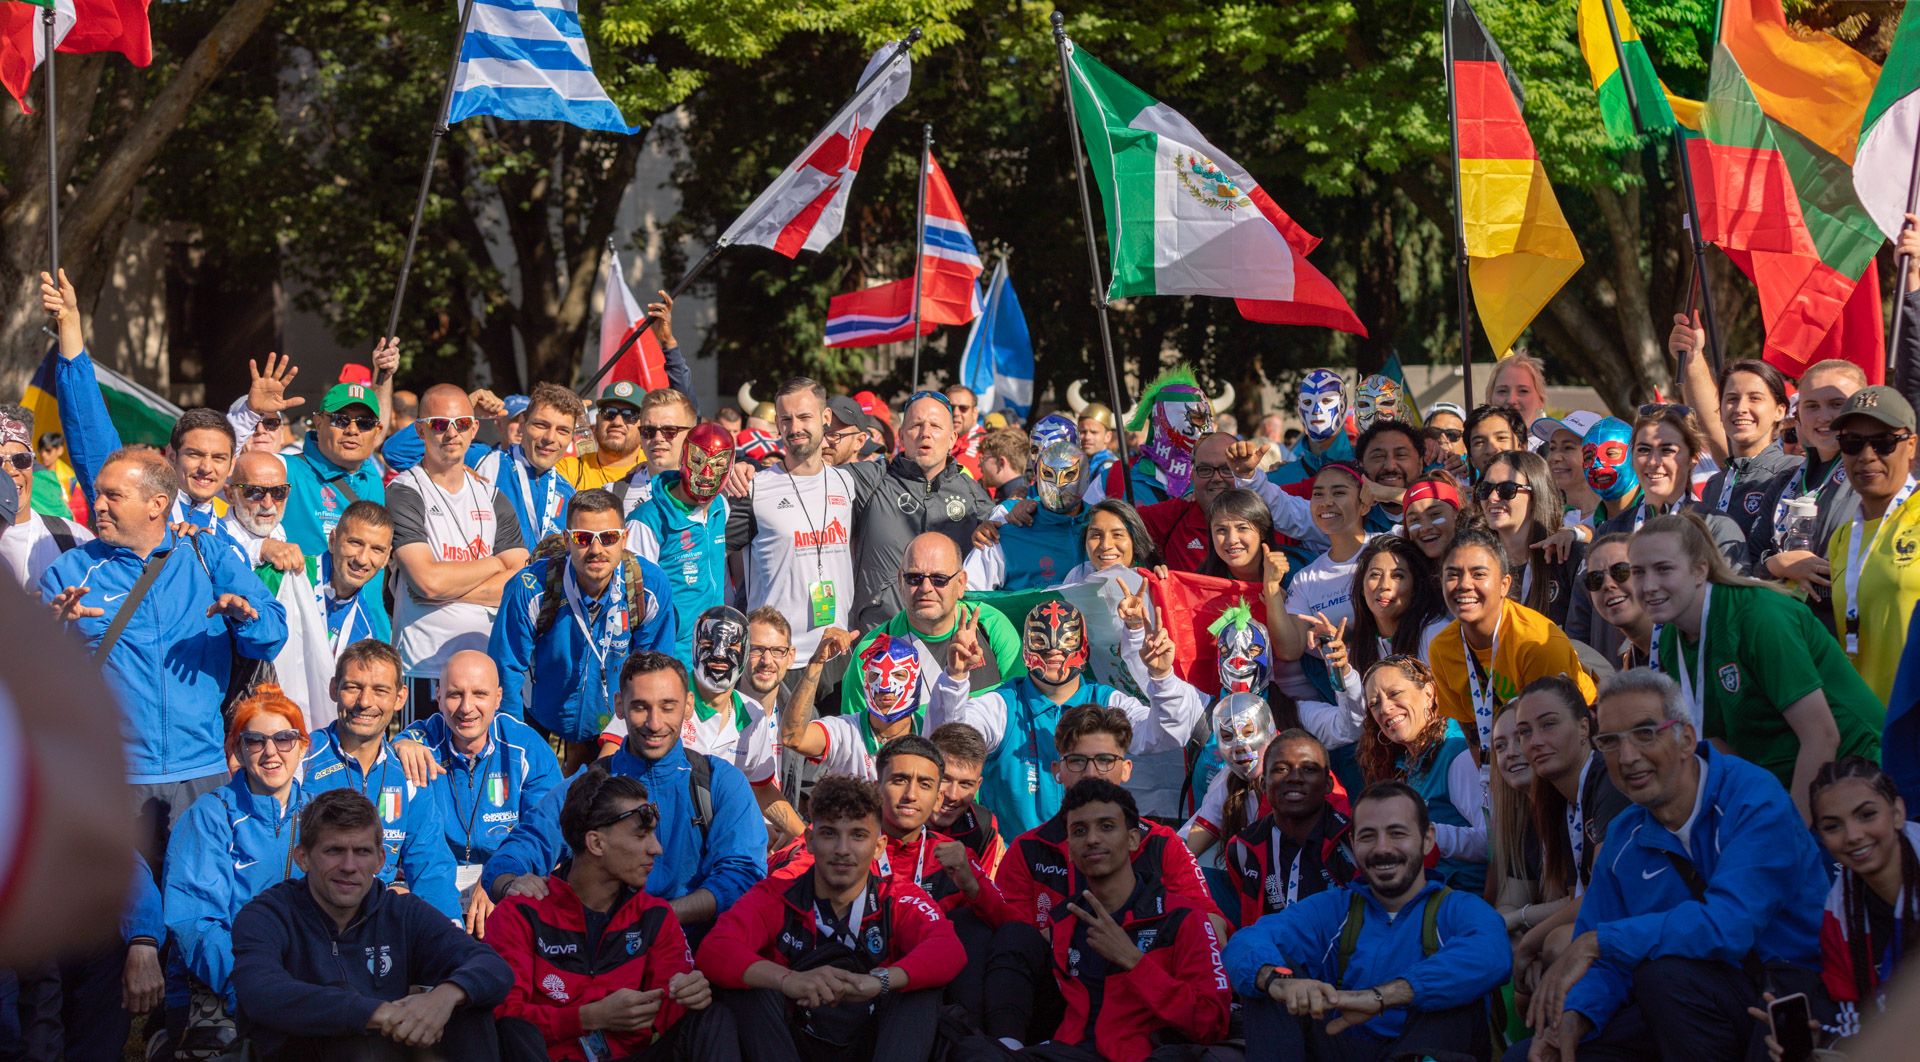 Homeless World Cup participants, coaches and others pose with flags and items representing their countries.